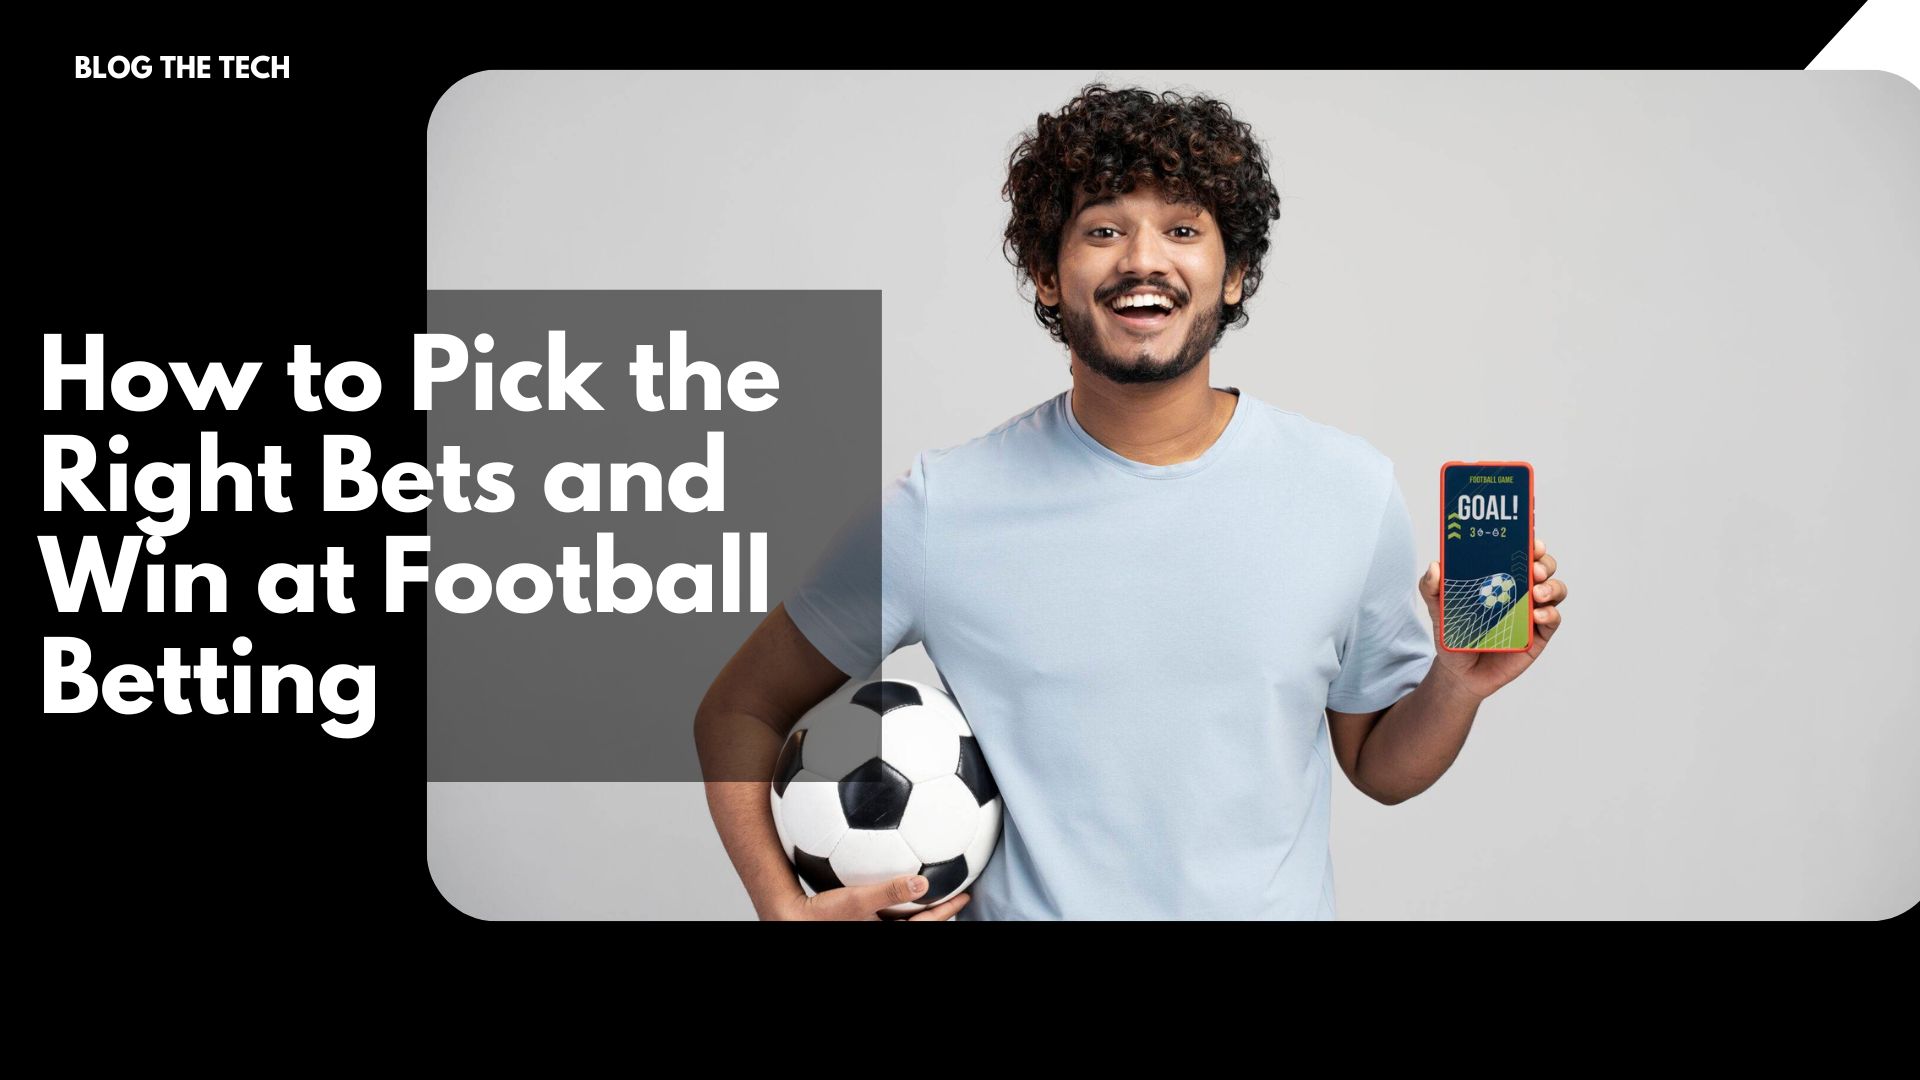 How to Pick the Right Bets and Win at Football Betting